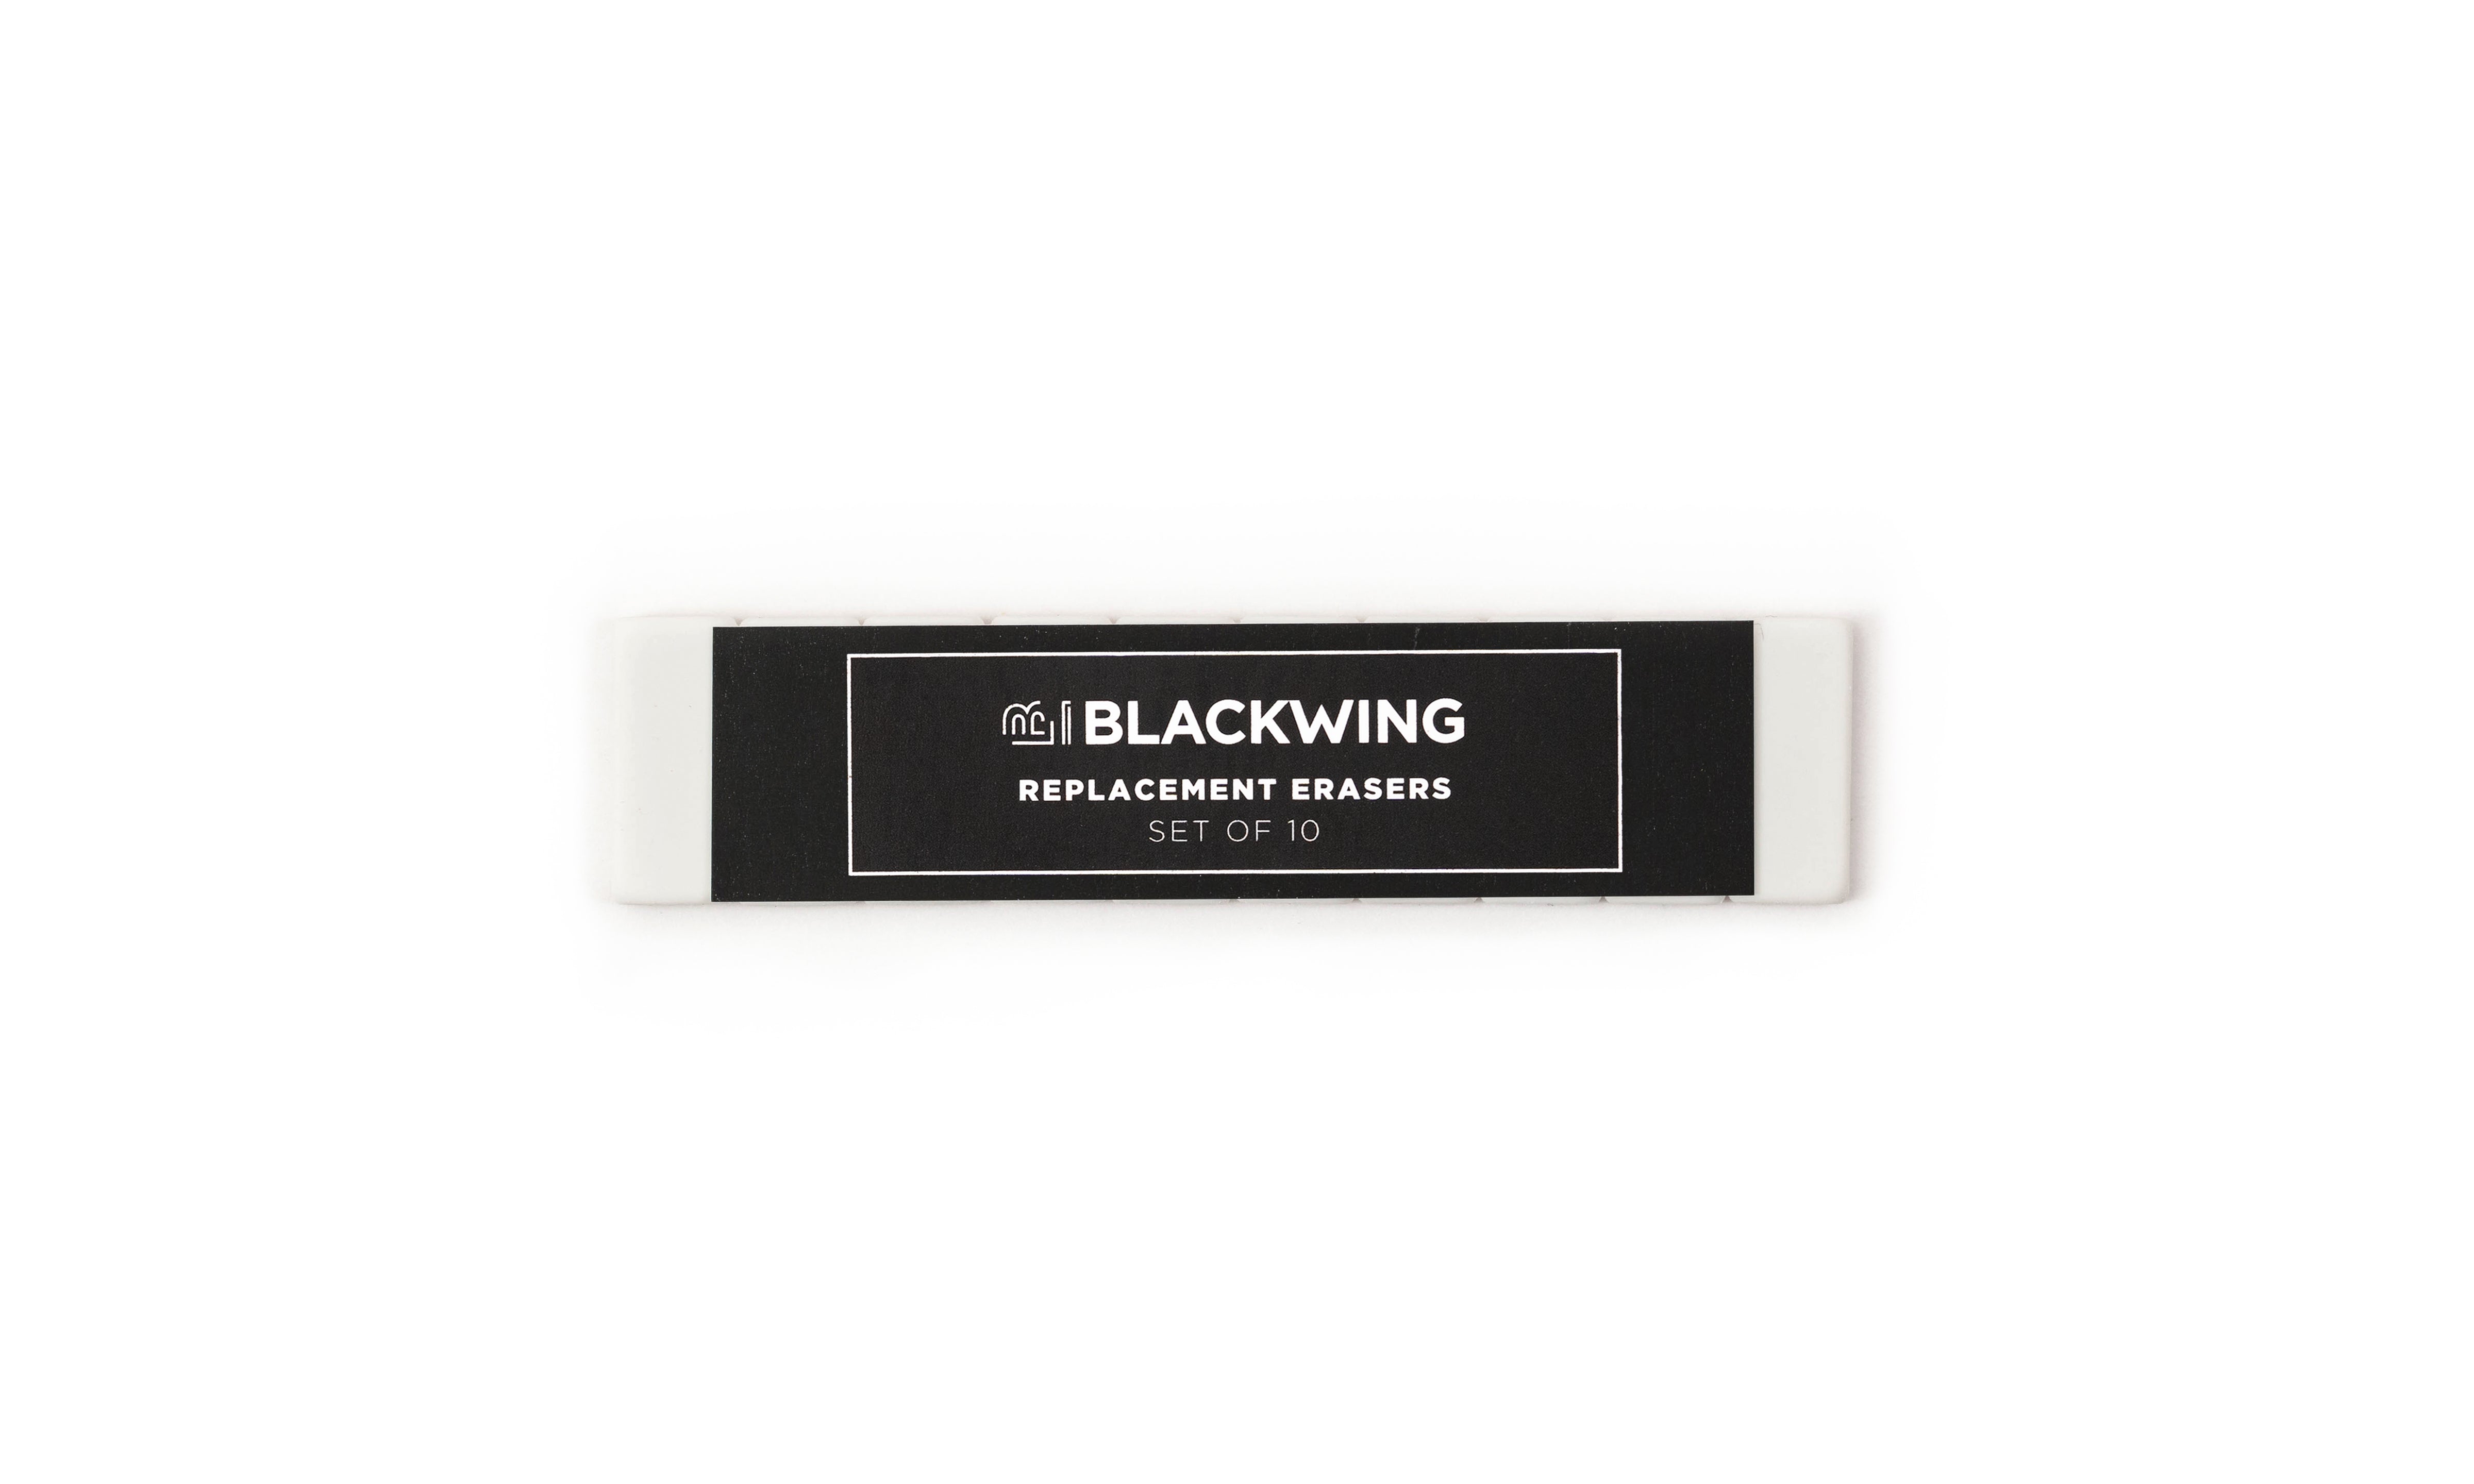 Blackwing Replacement Erasers - Blackwing